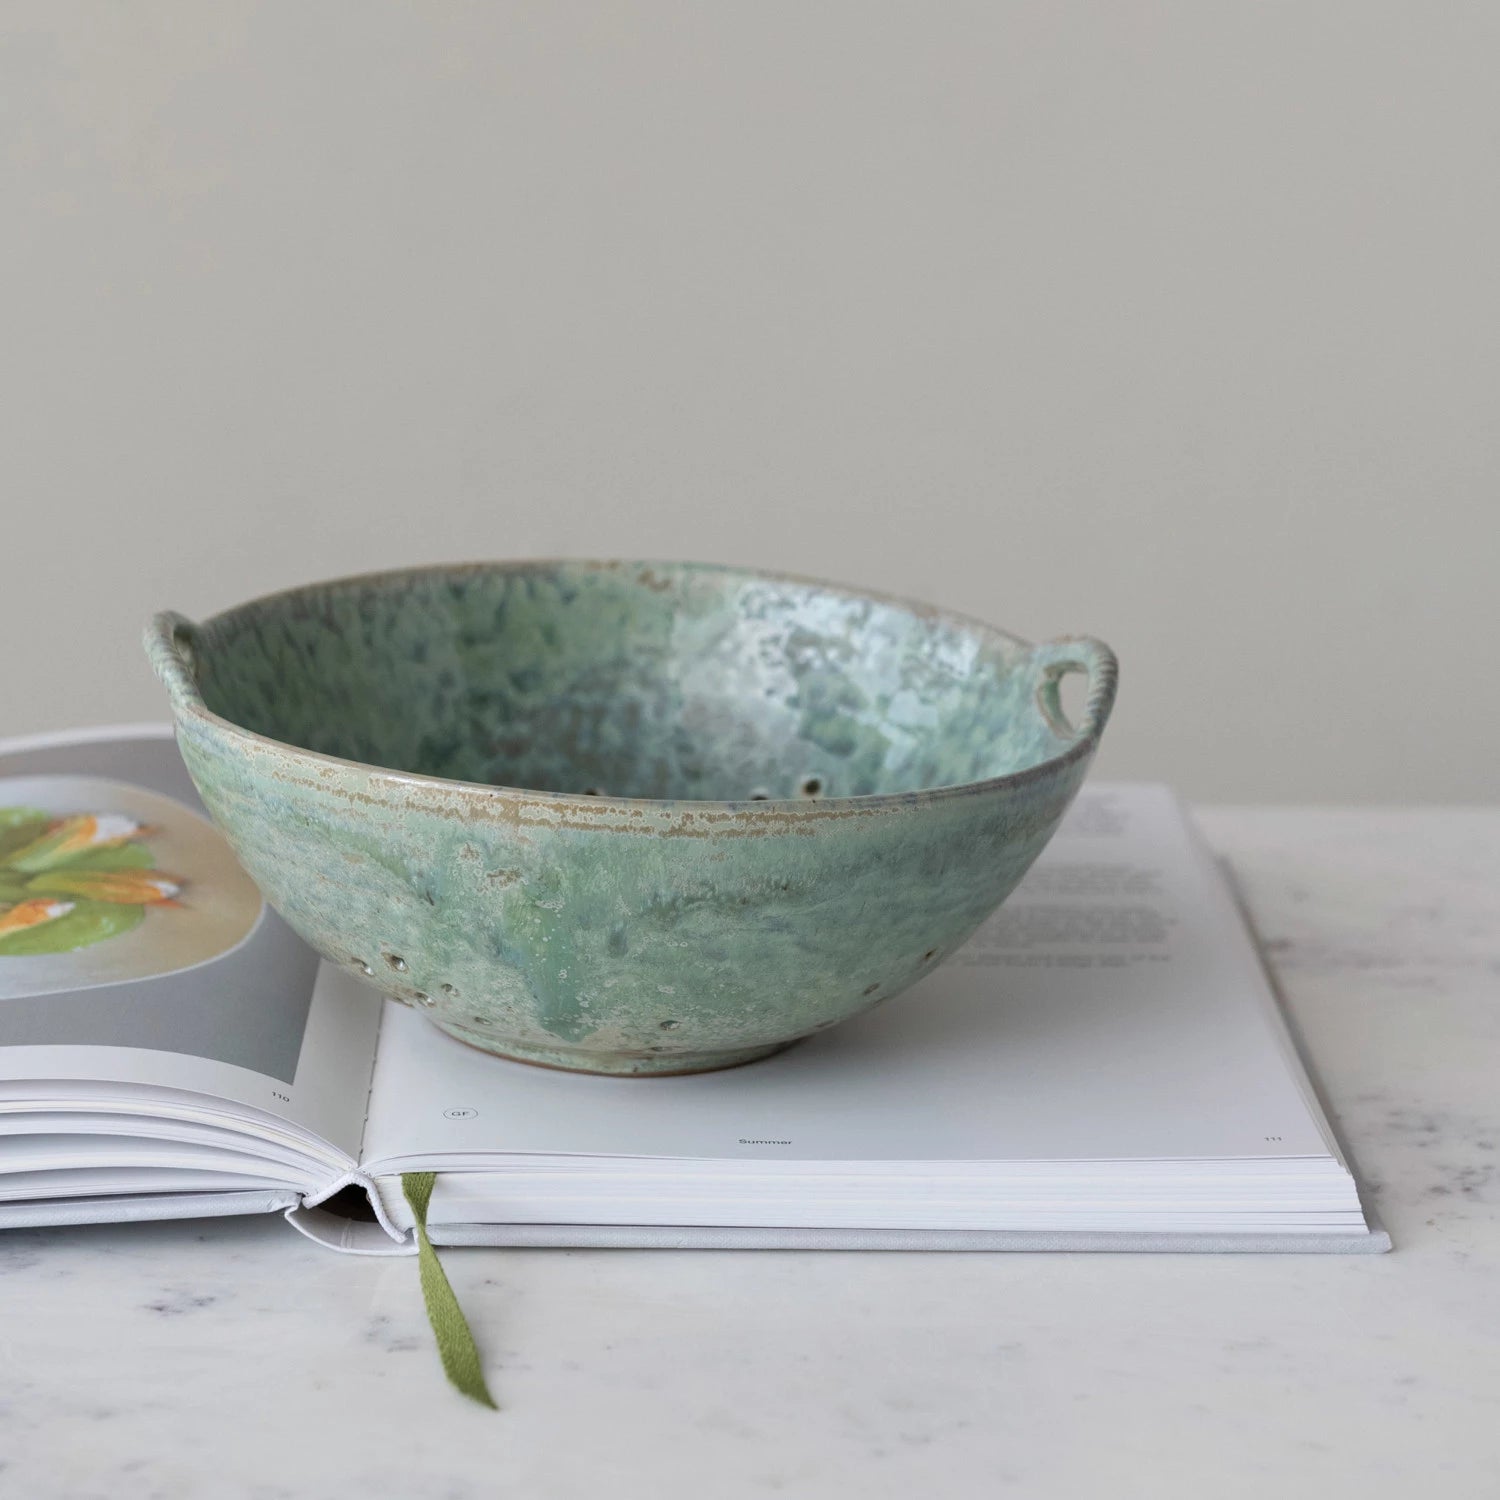 stoneware straining bowl with small side handle sitting on an open recipe book.